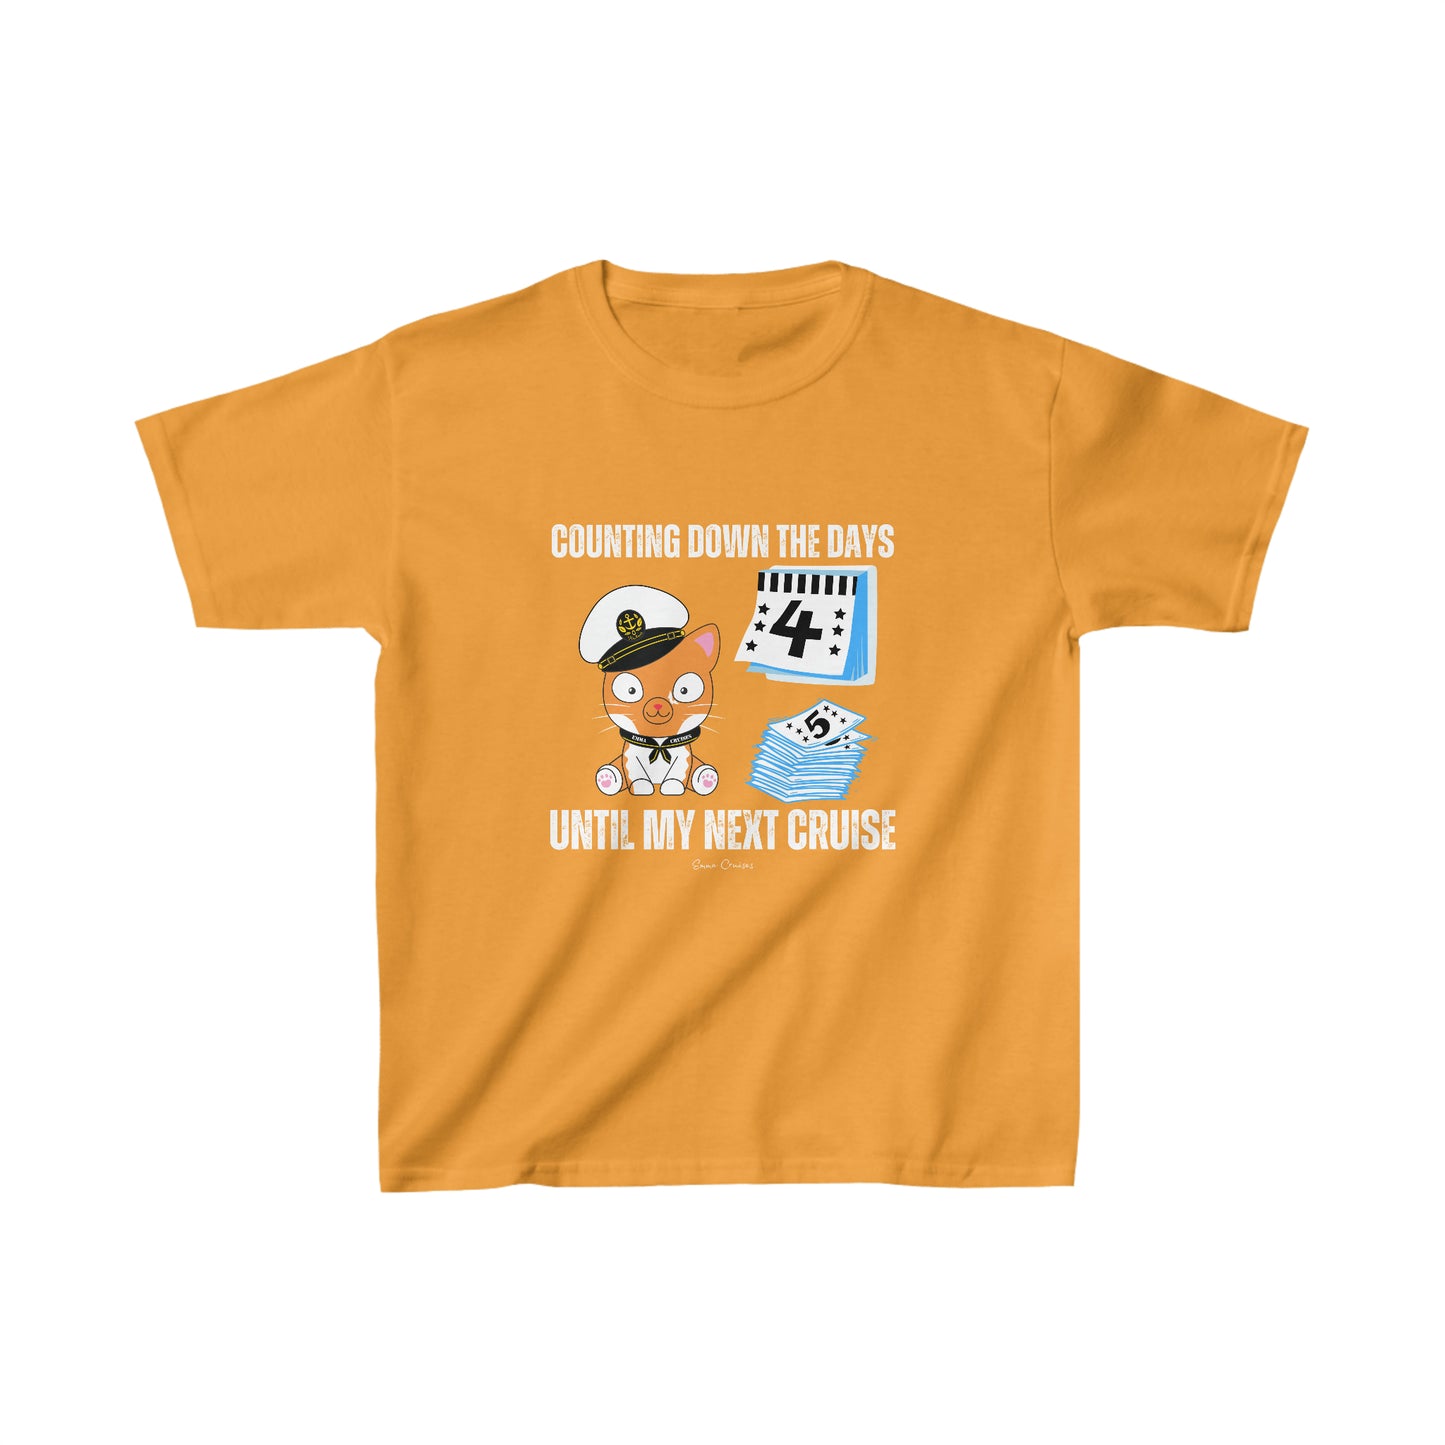 Counting Down the Days - Kids UNISEX T-Shirt